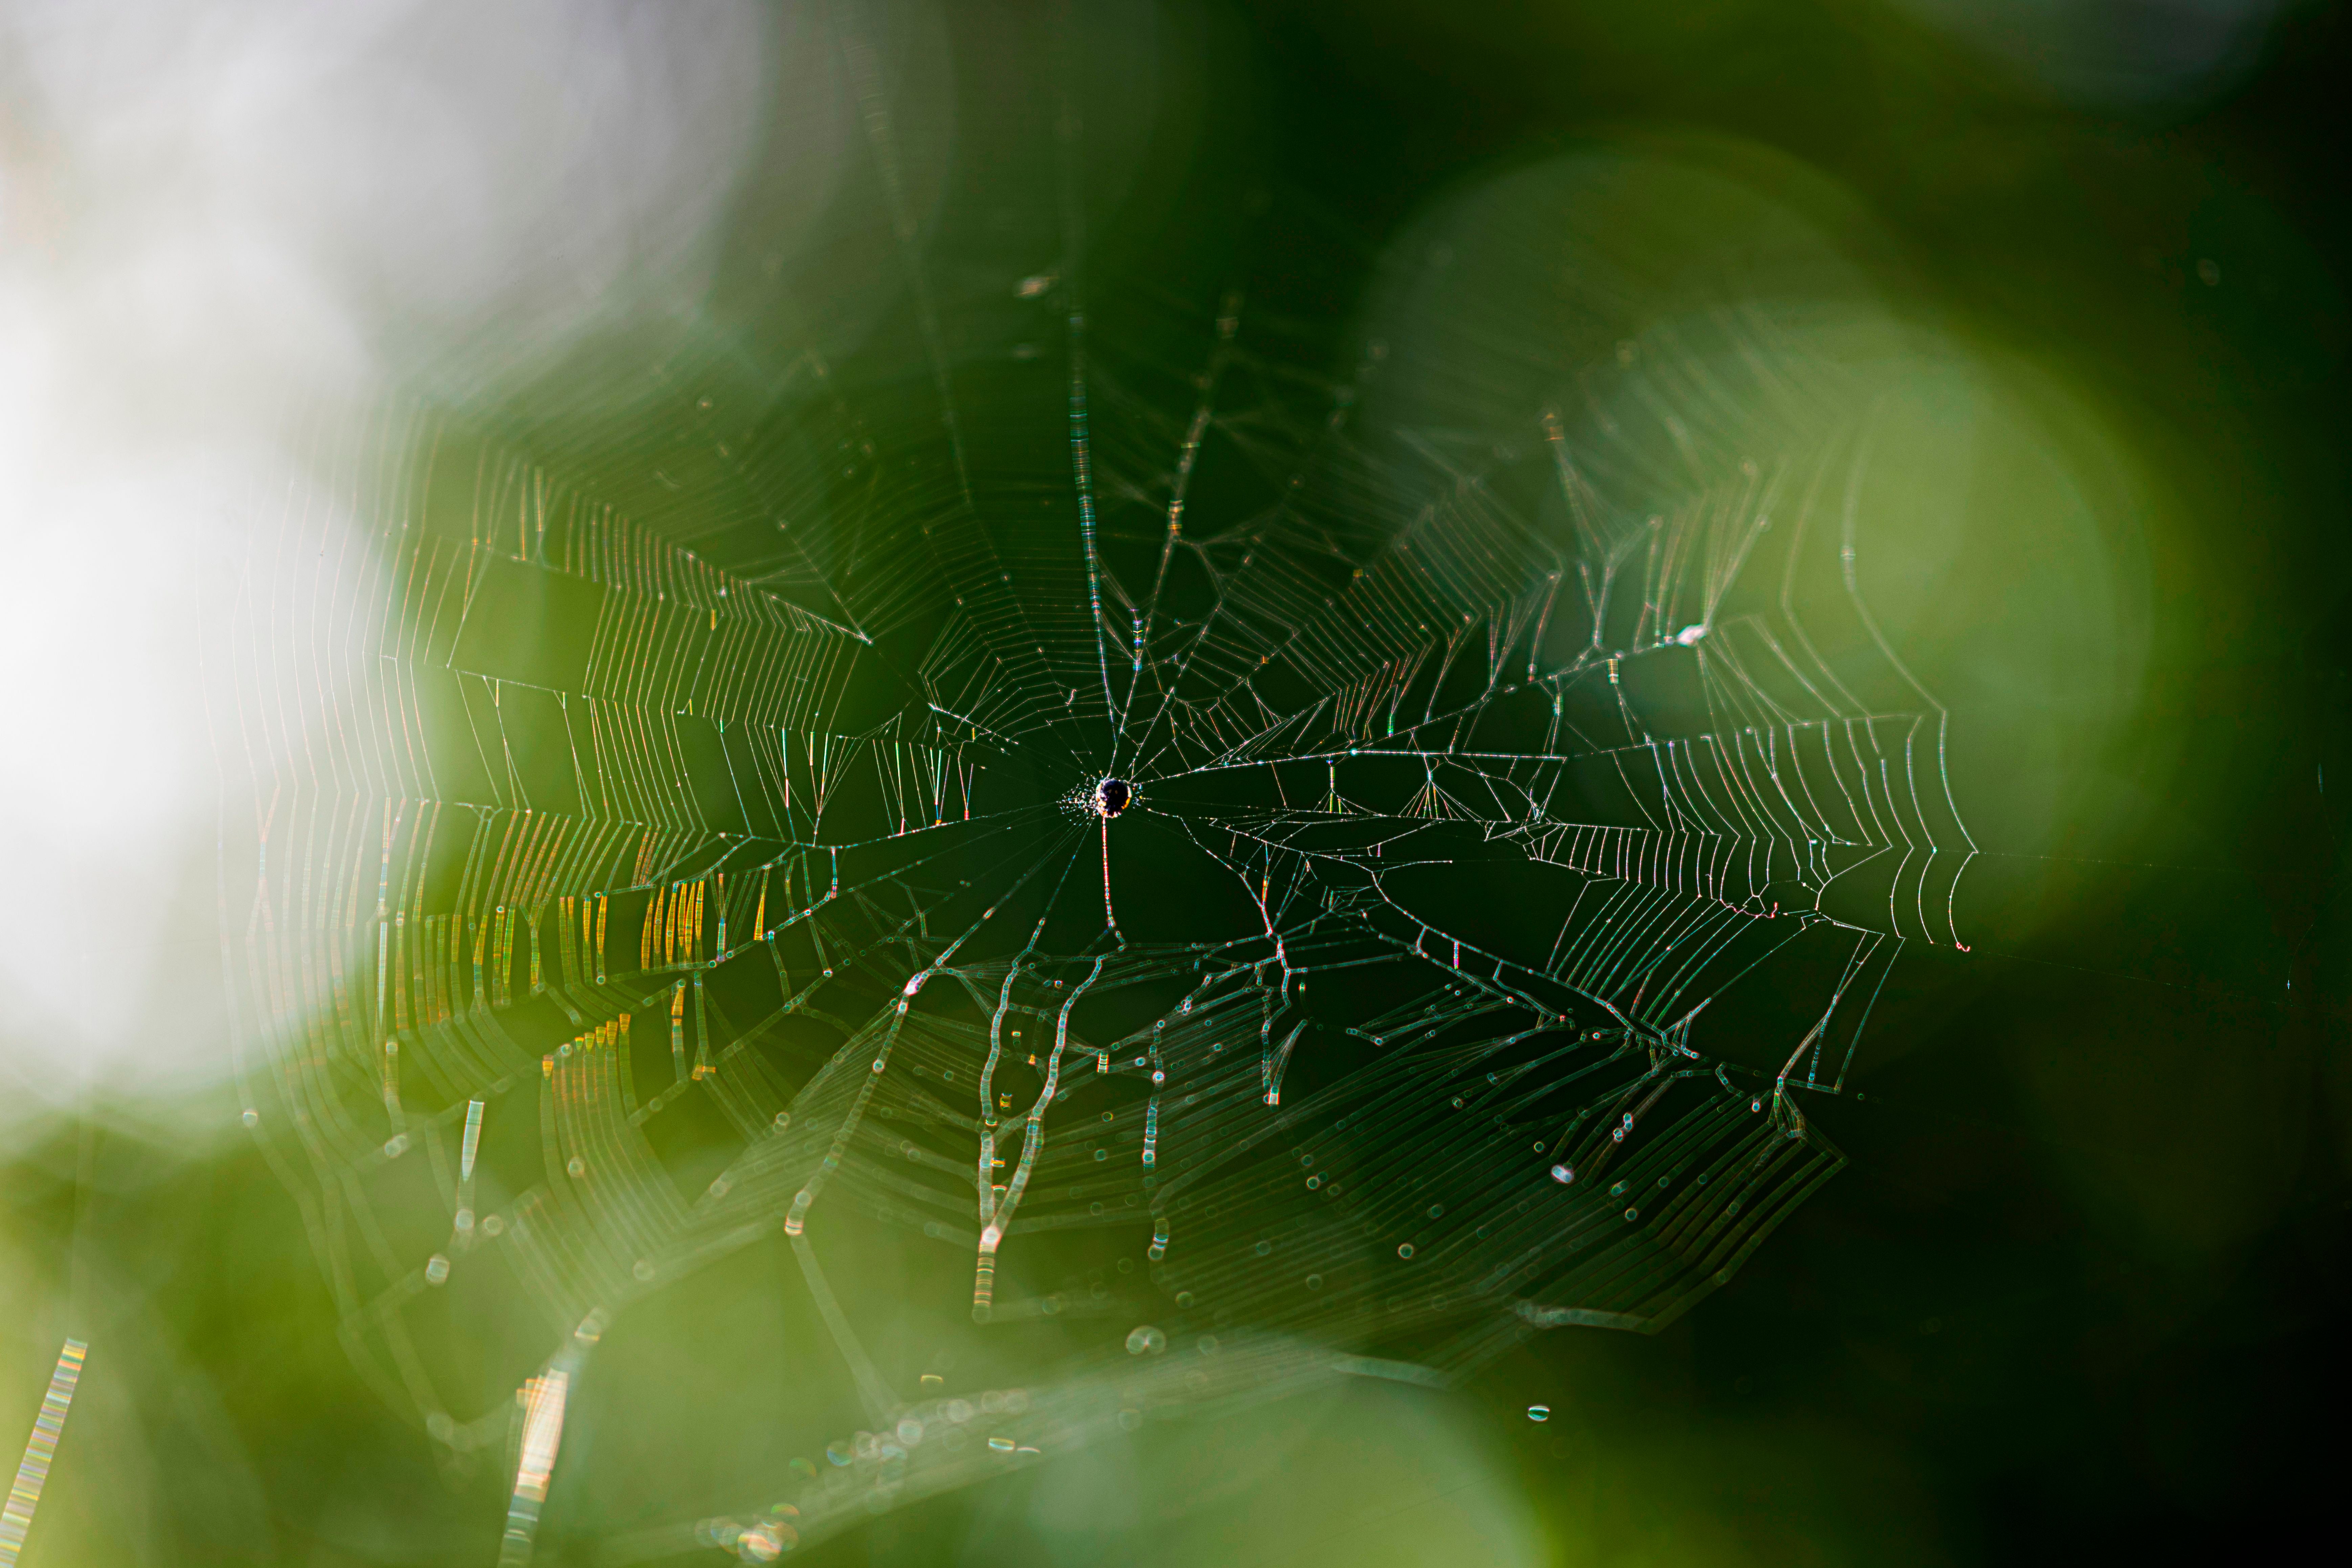 File photo: A spider sits in the centre of its web on a residential balcony in New Delhi on 7 April, 2020